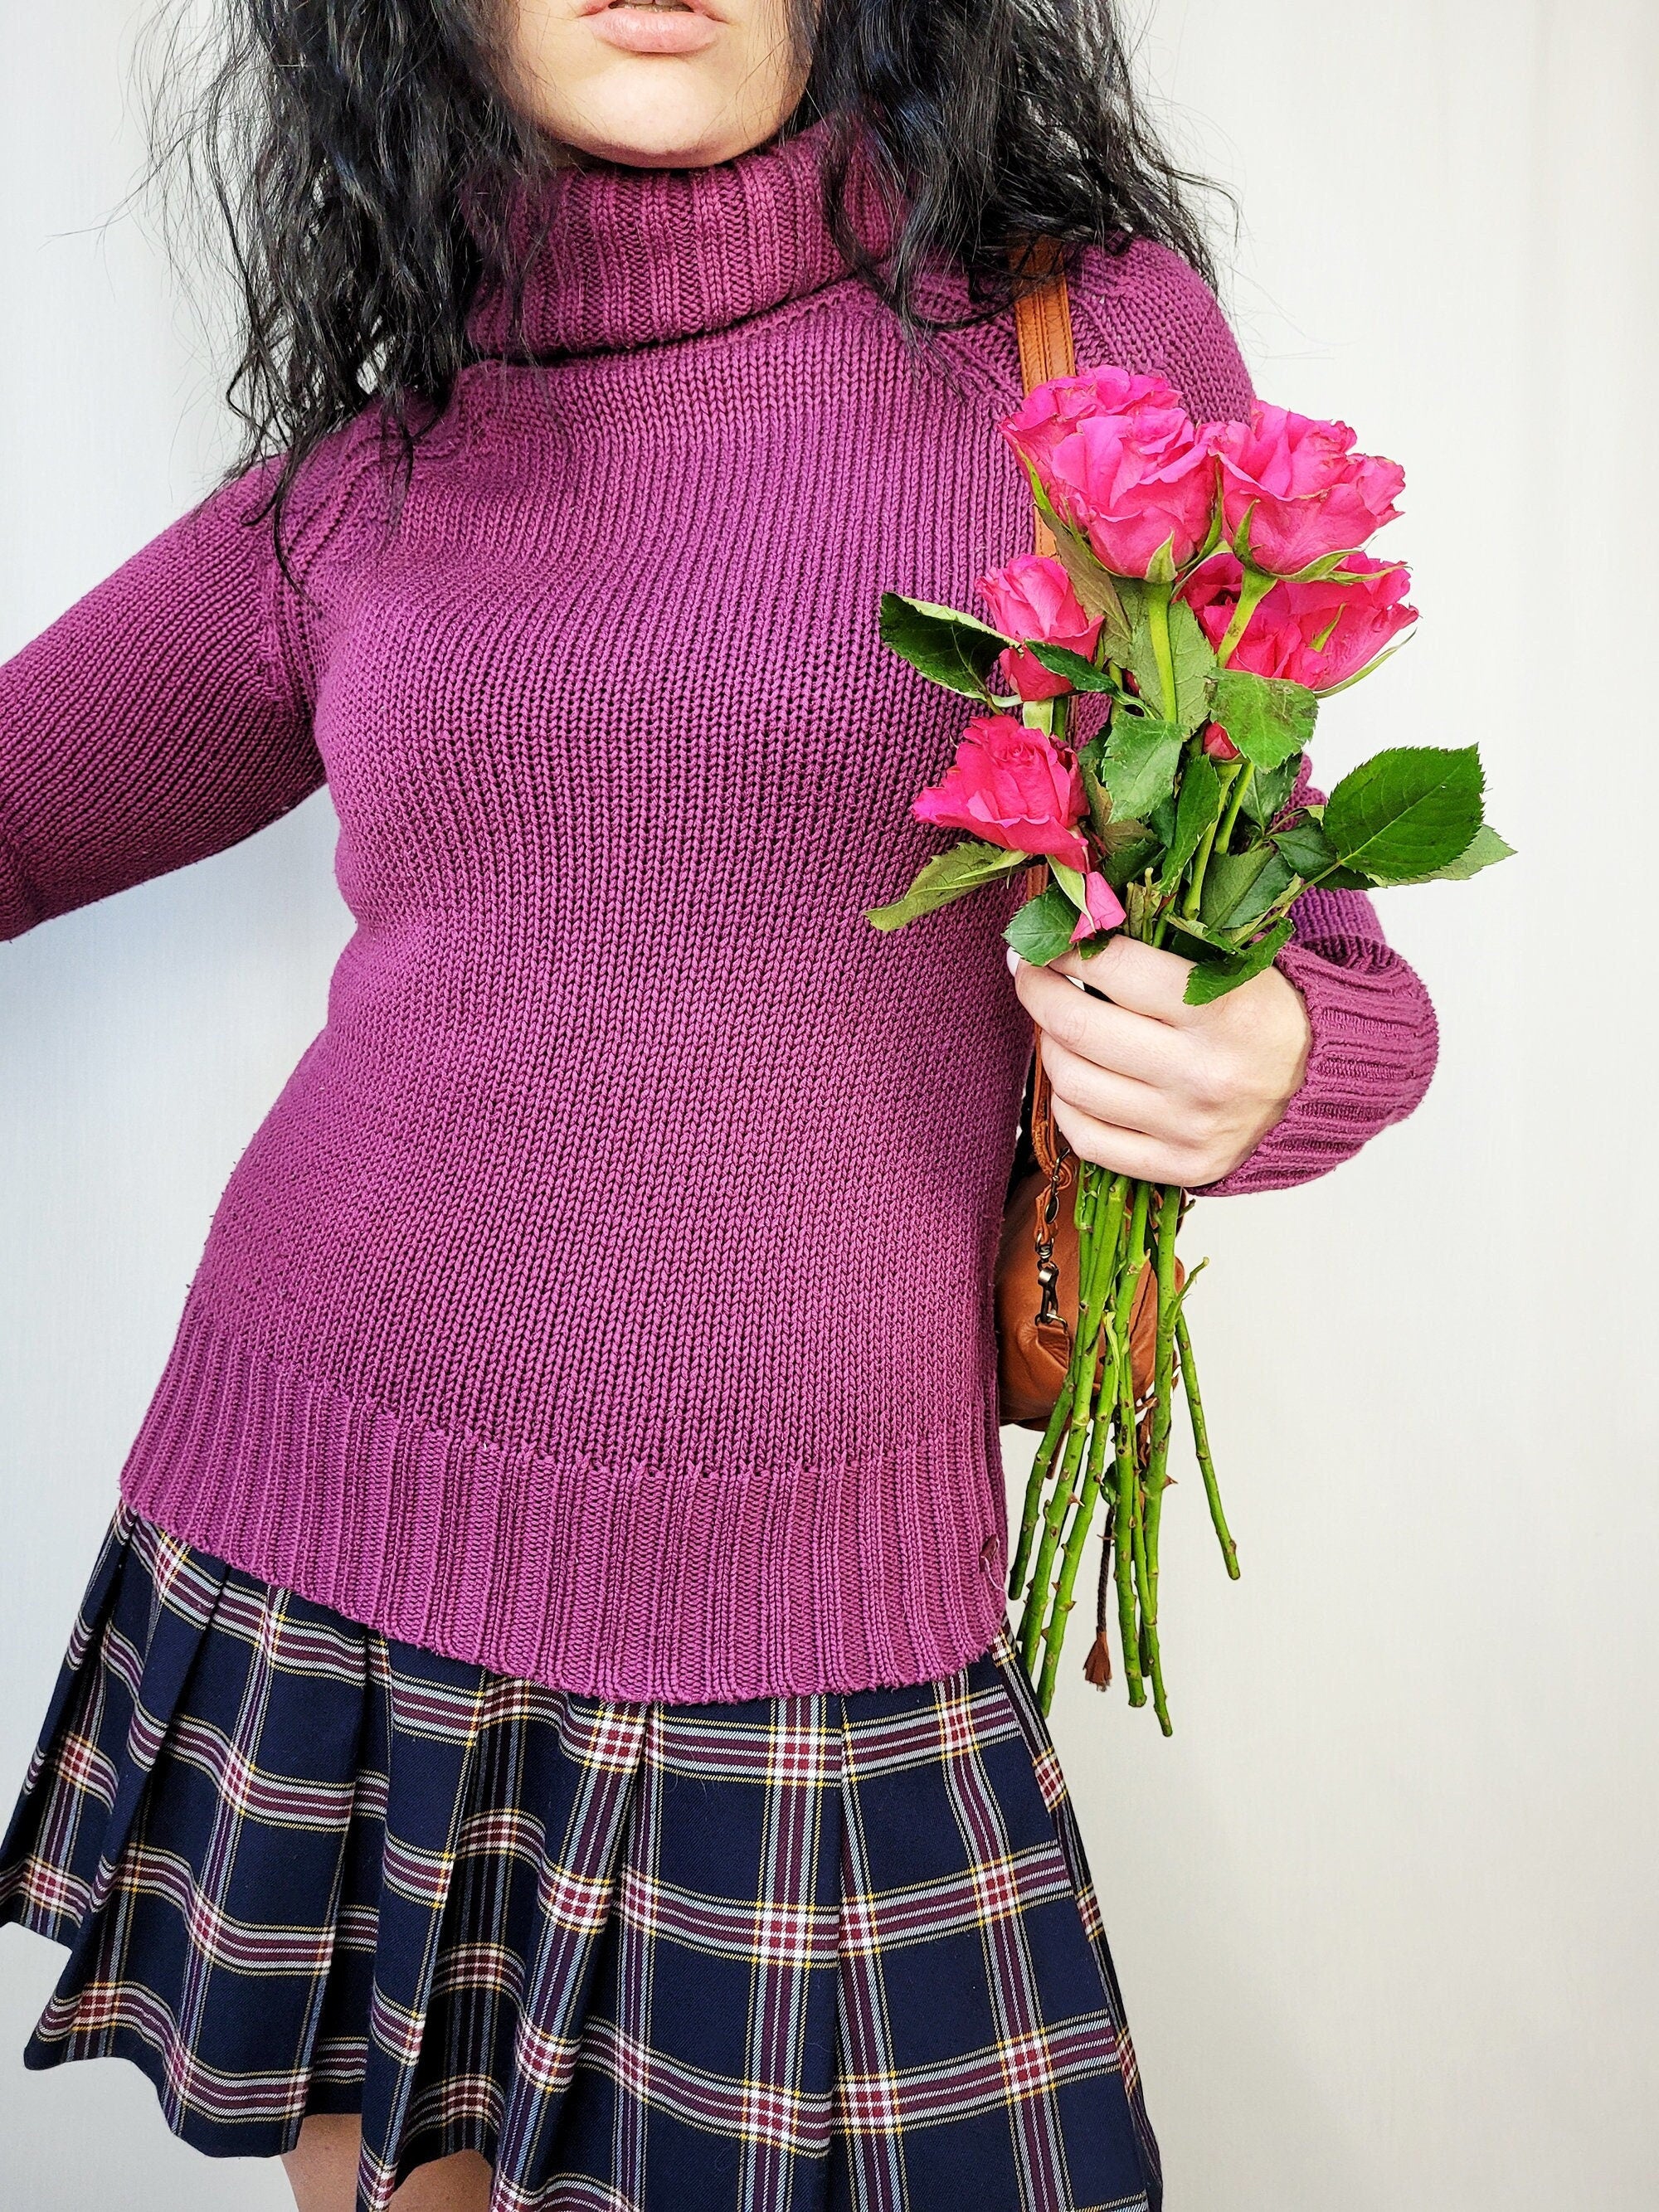 Vintage 90s purple knitted roll neck jumper top